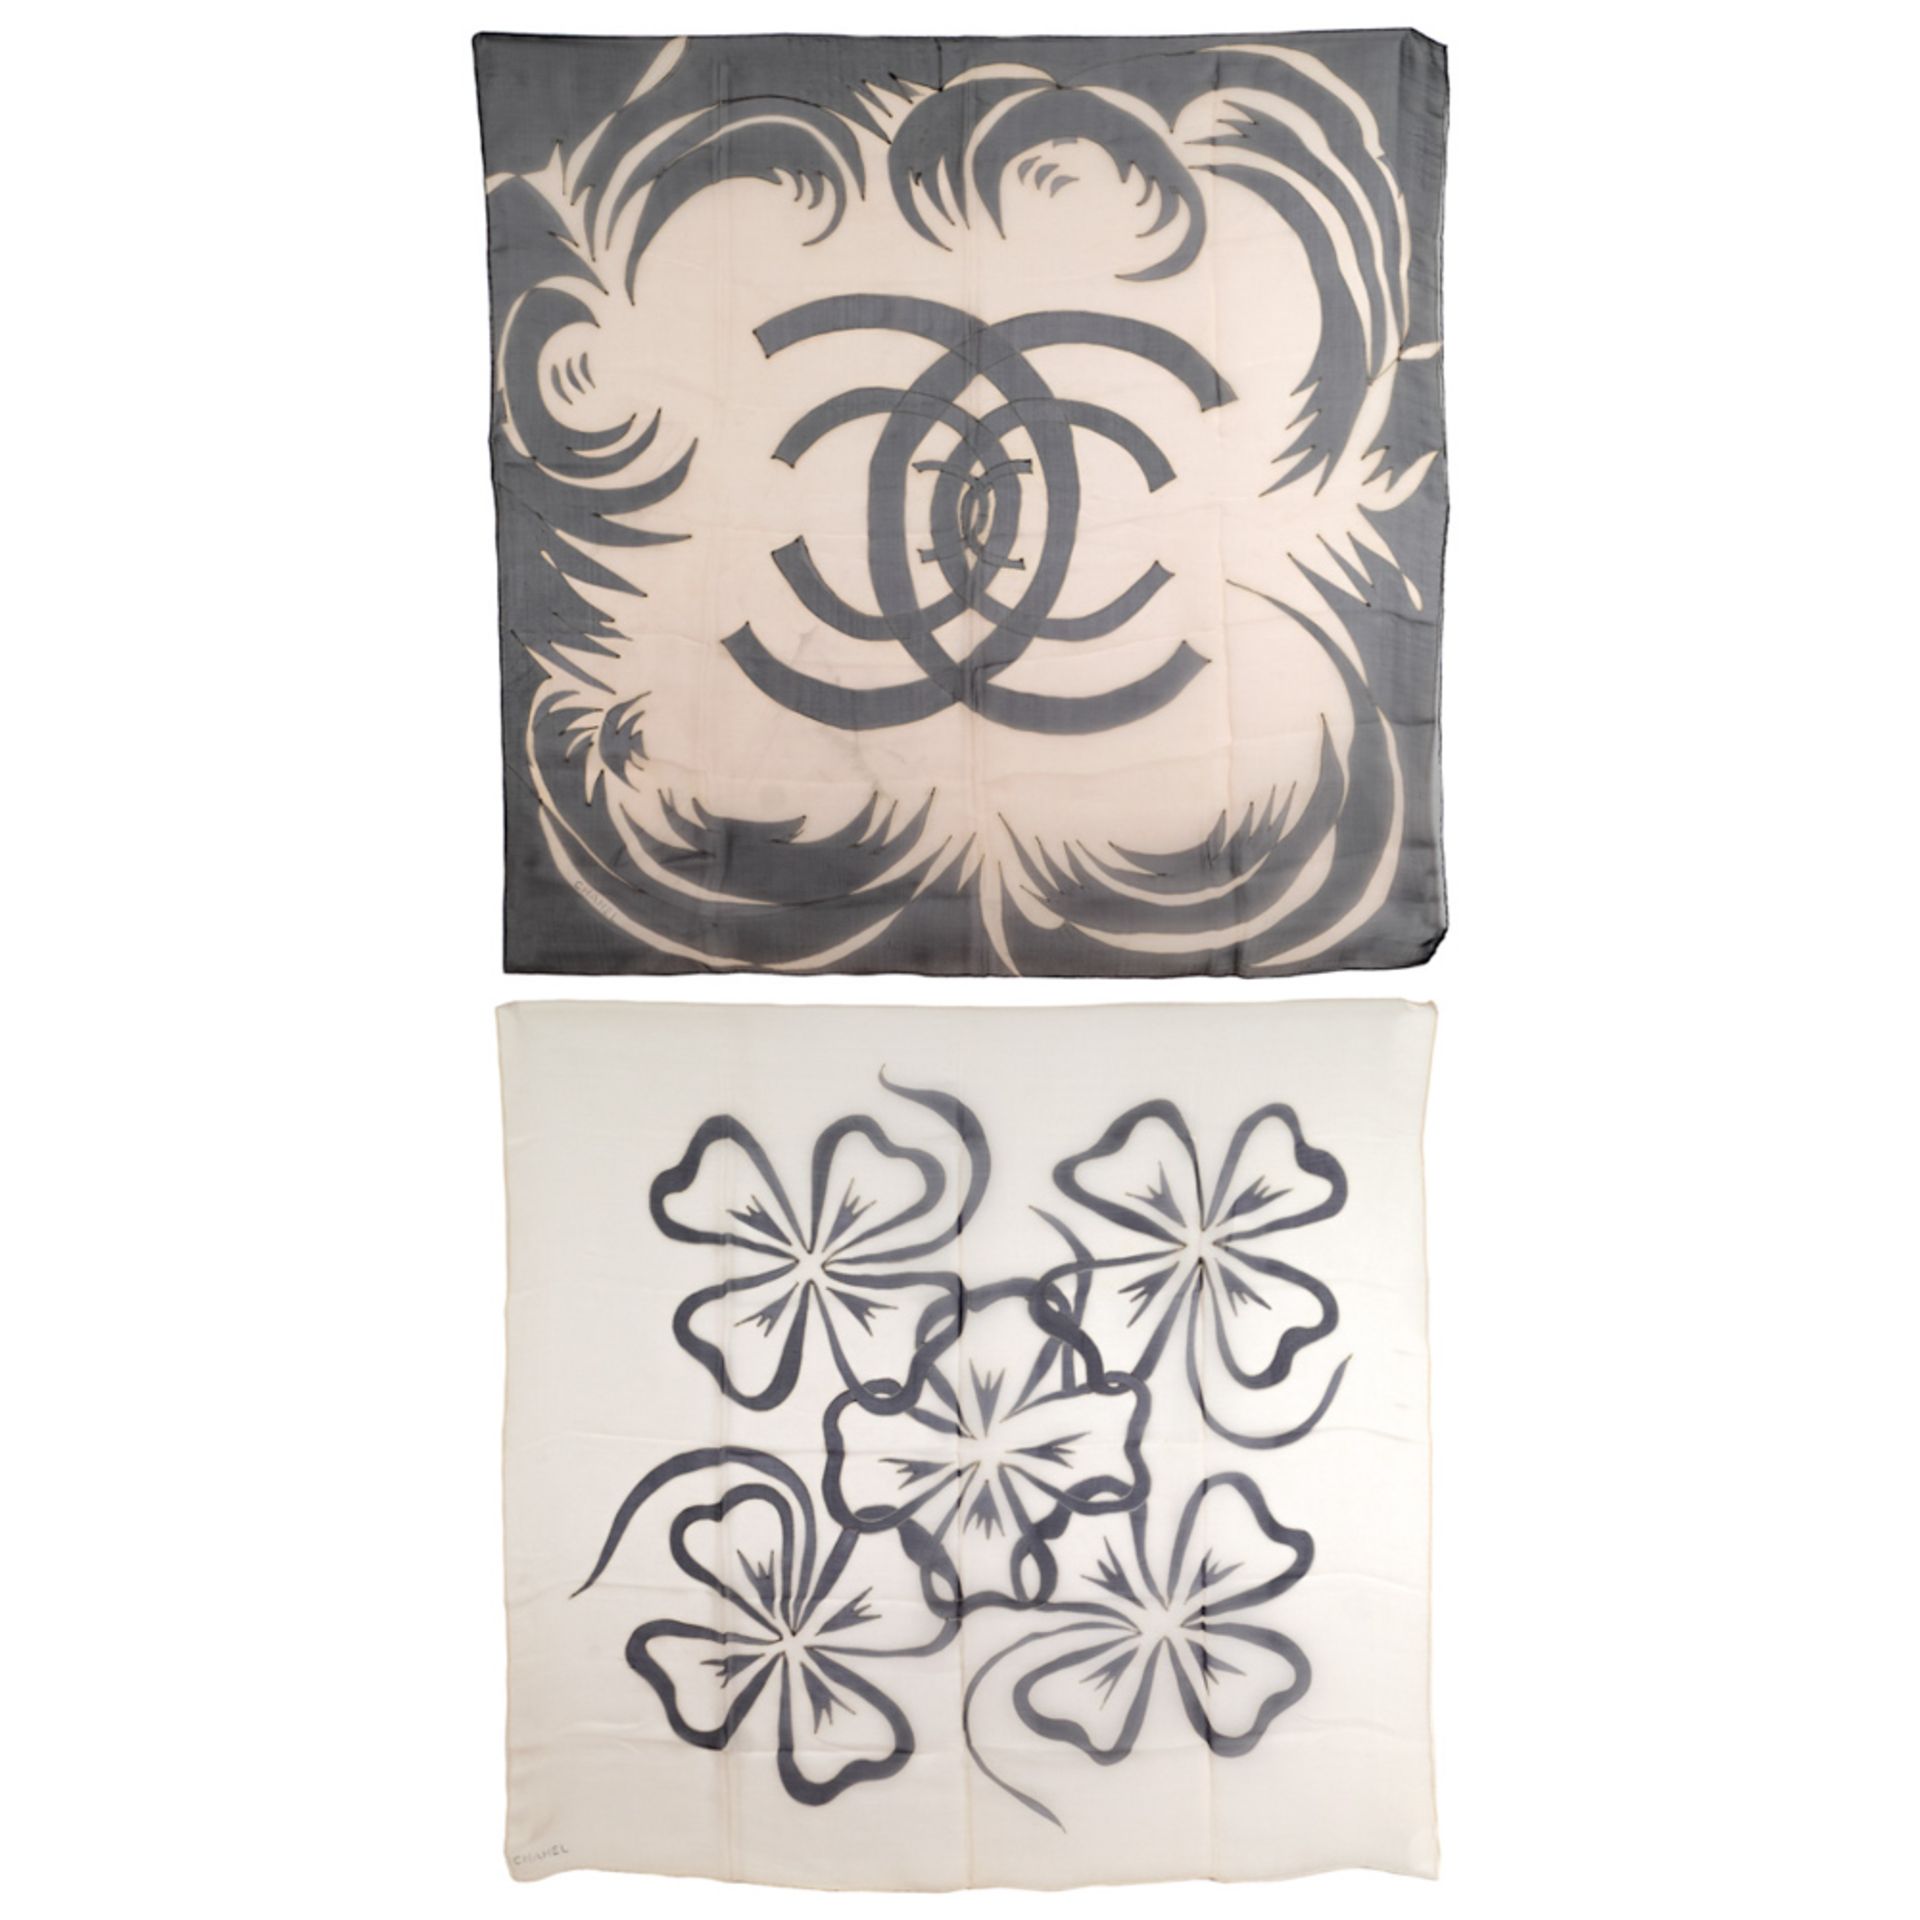 Chanel, two vintage scarves 90x90 cm.